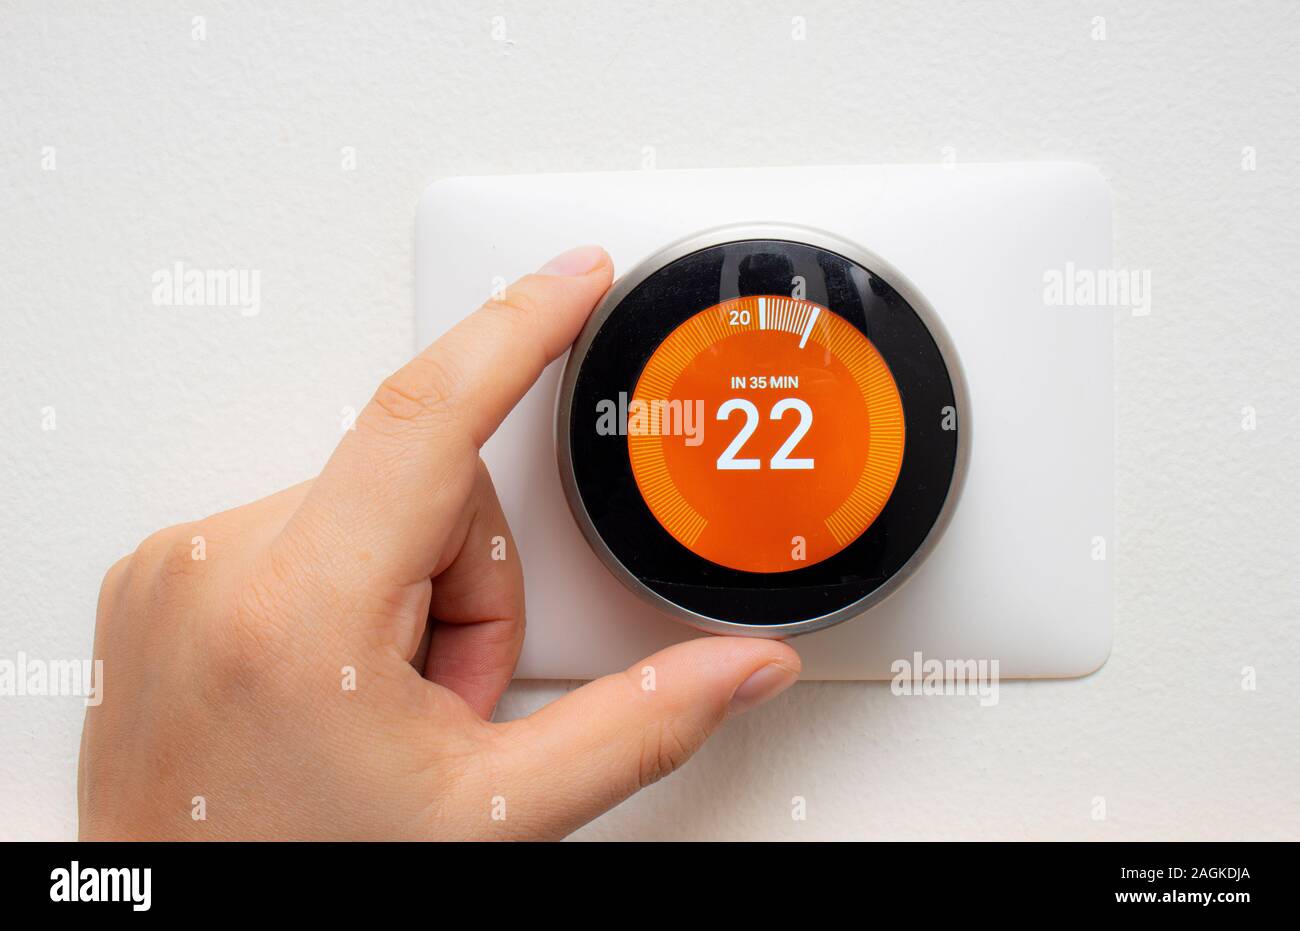 https://c8.alamy.com/comp/2AGKDJA/smart-thermostat-with-a-person-warming-up-the-room-temperature-with-a-soft-shadow-2AGKDJA.jpg